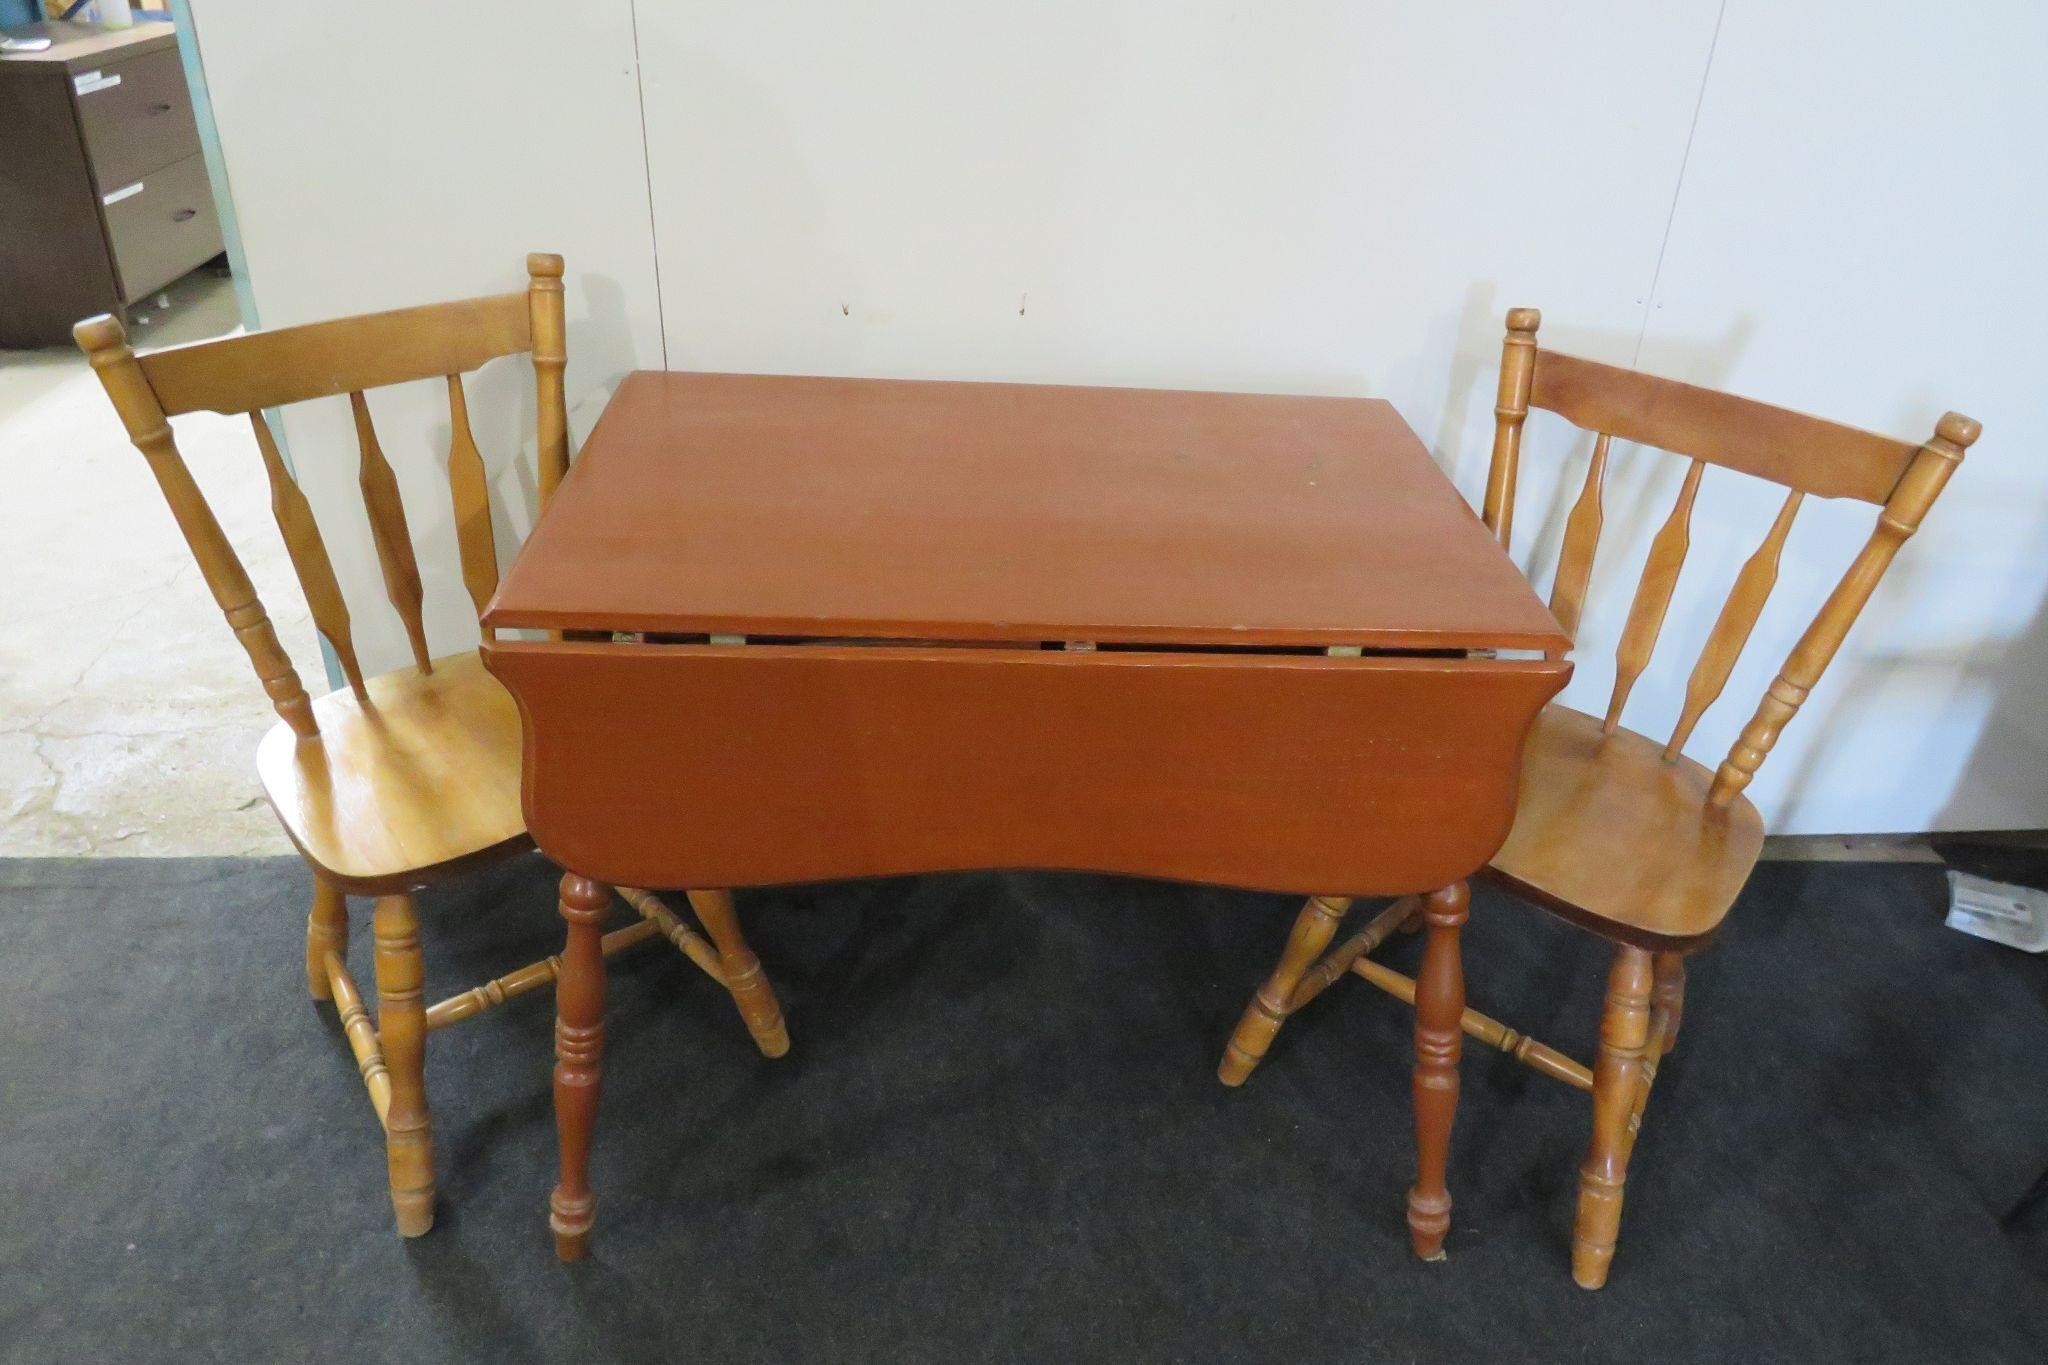 24" X 36" DROP LEAF WOOD TABLE / 2 CHAIRS